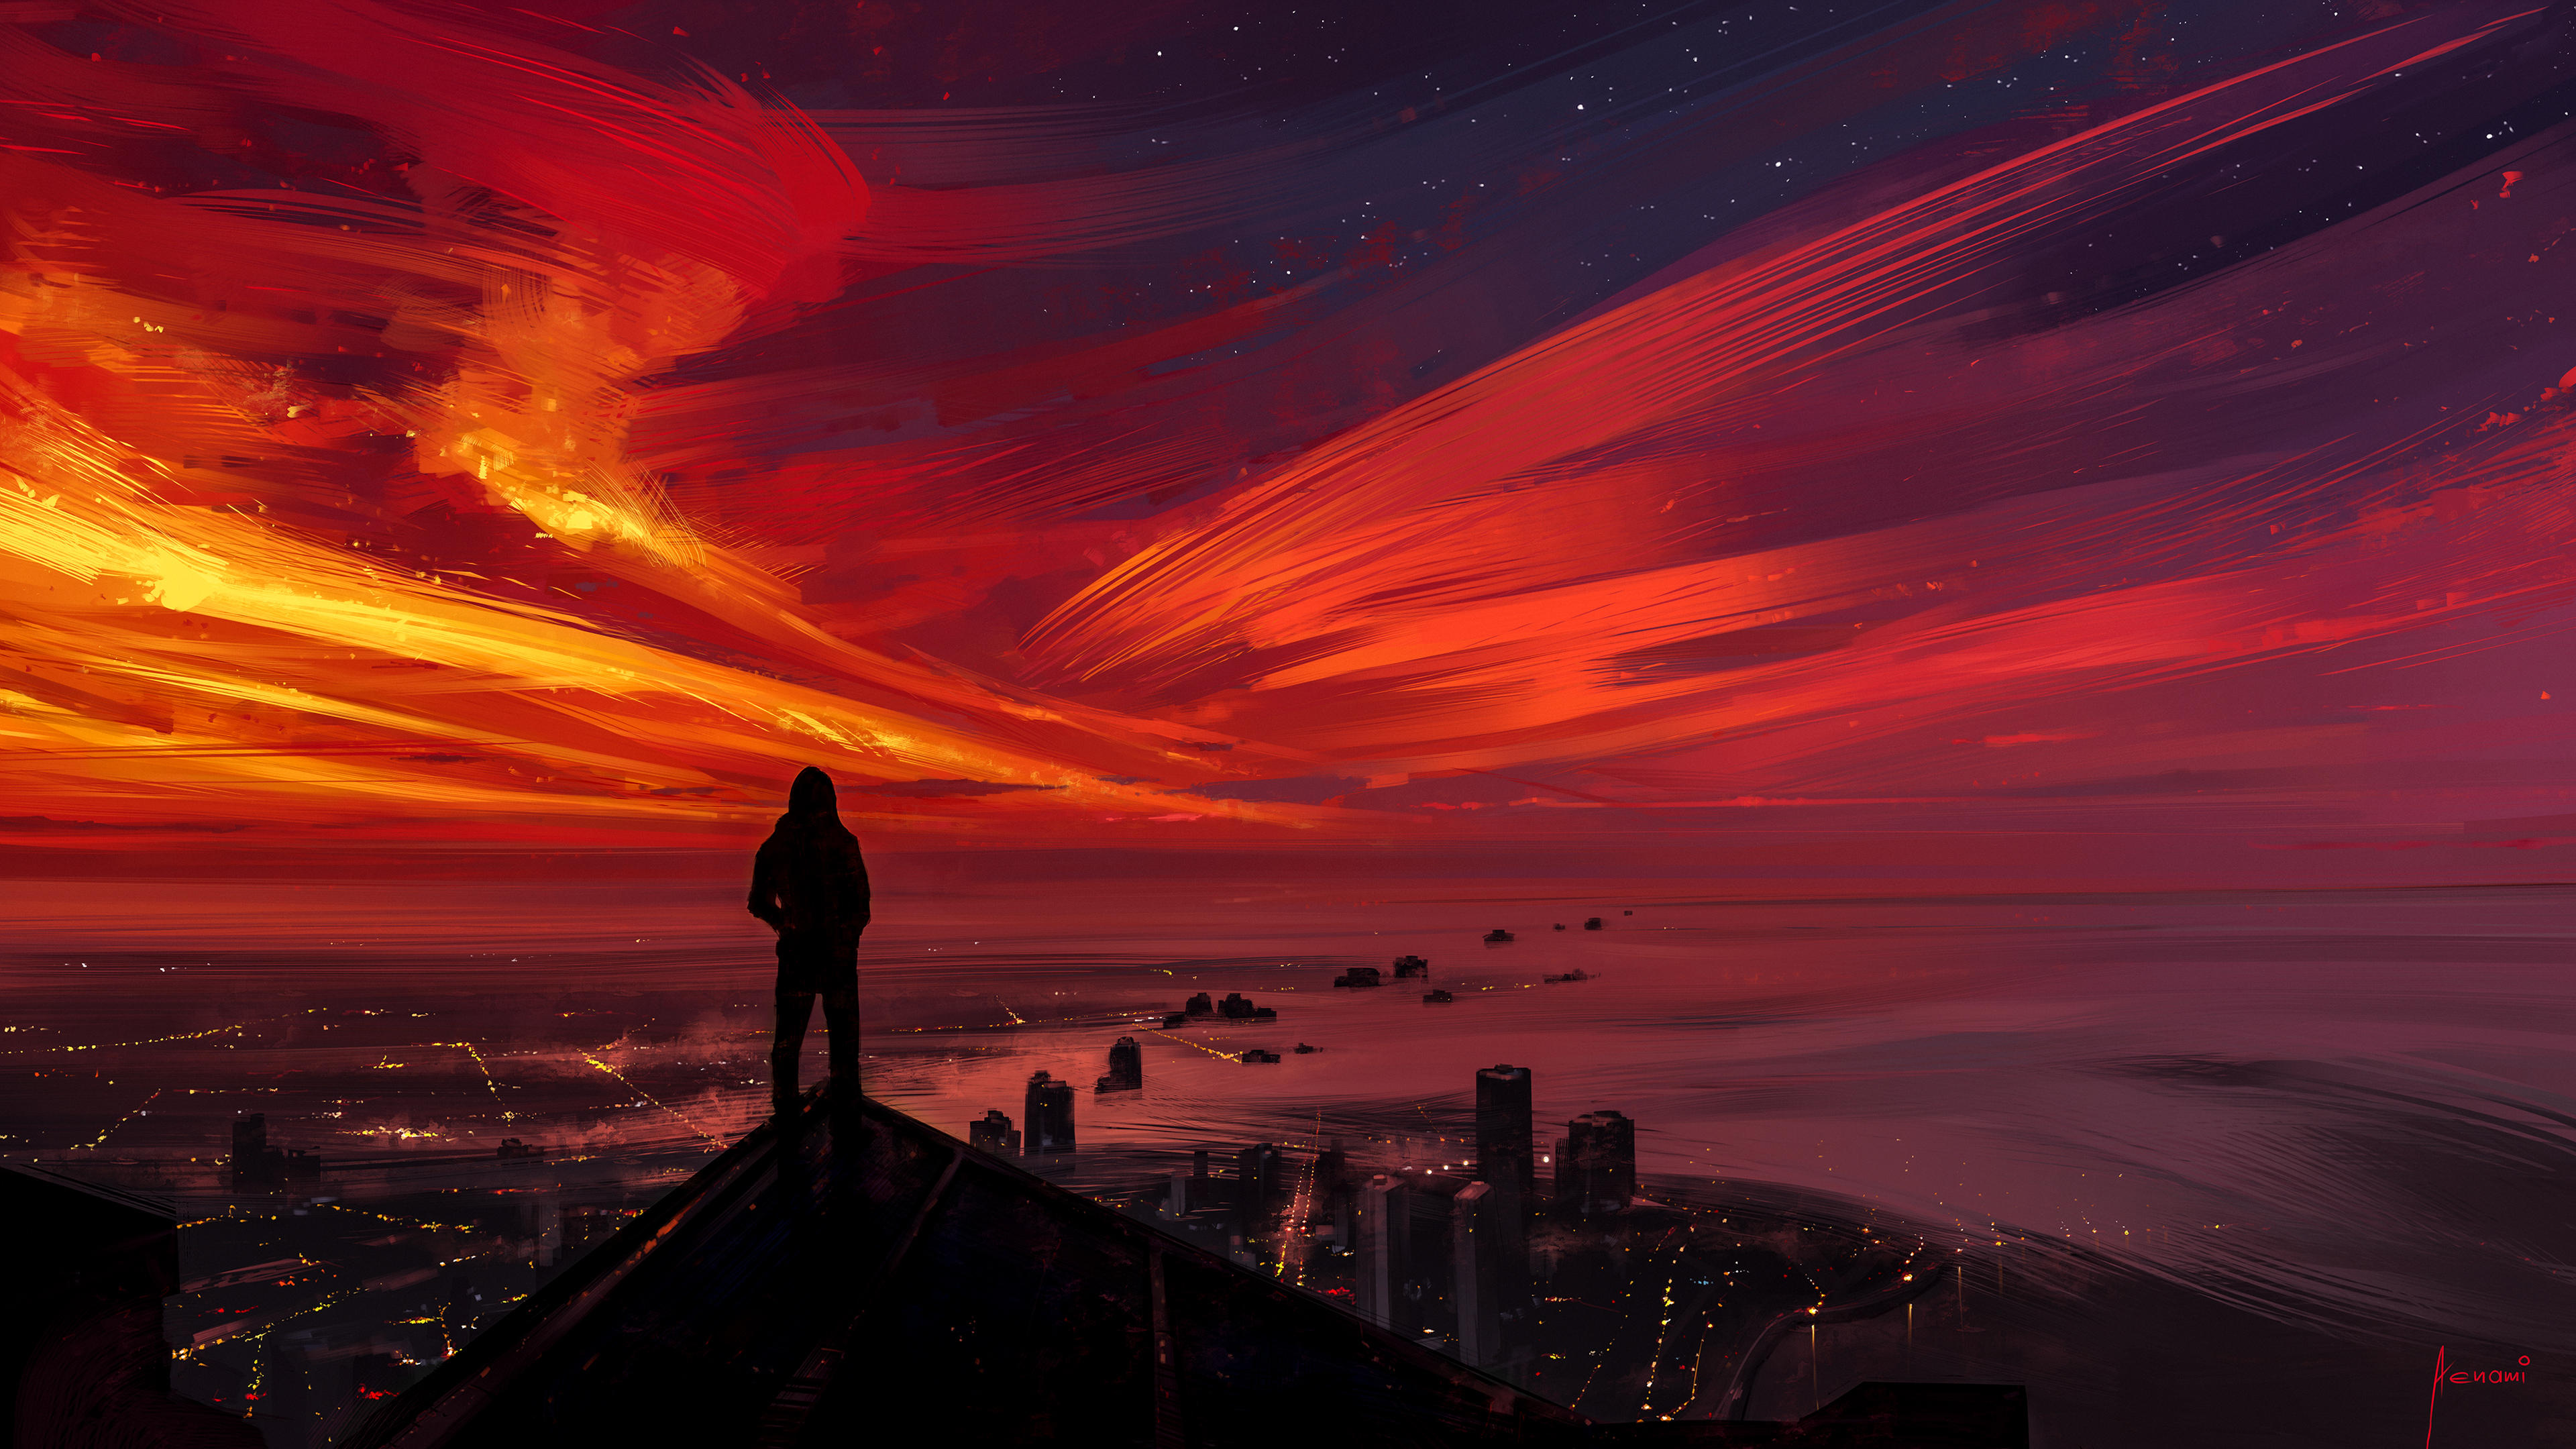 Watching the Sunset by Alena Aenami